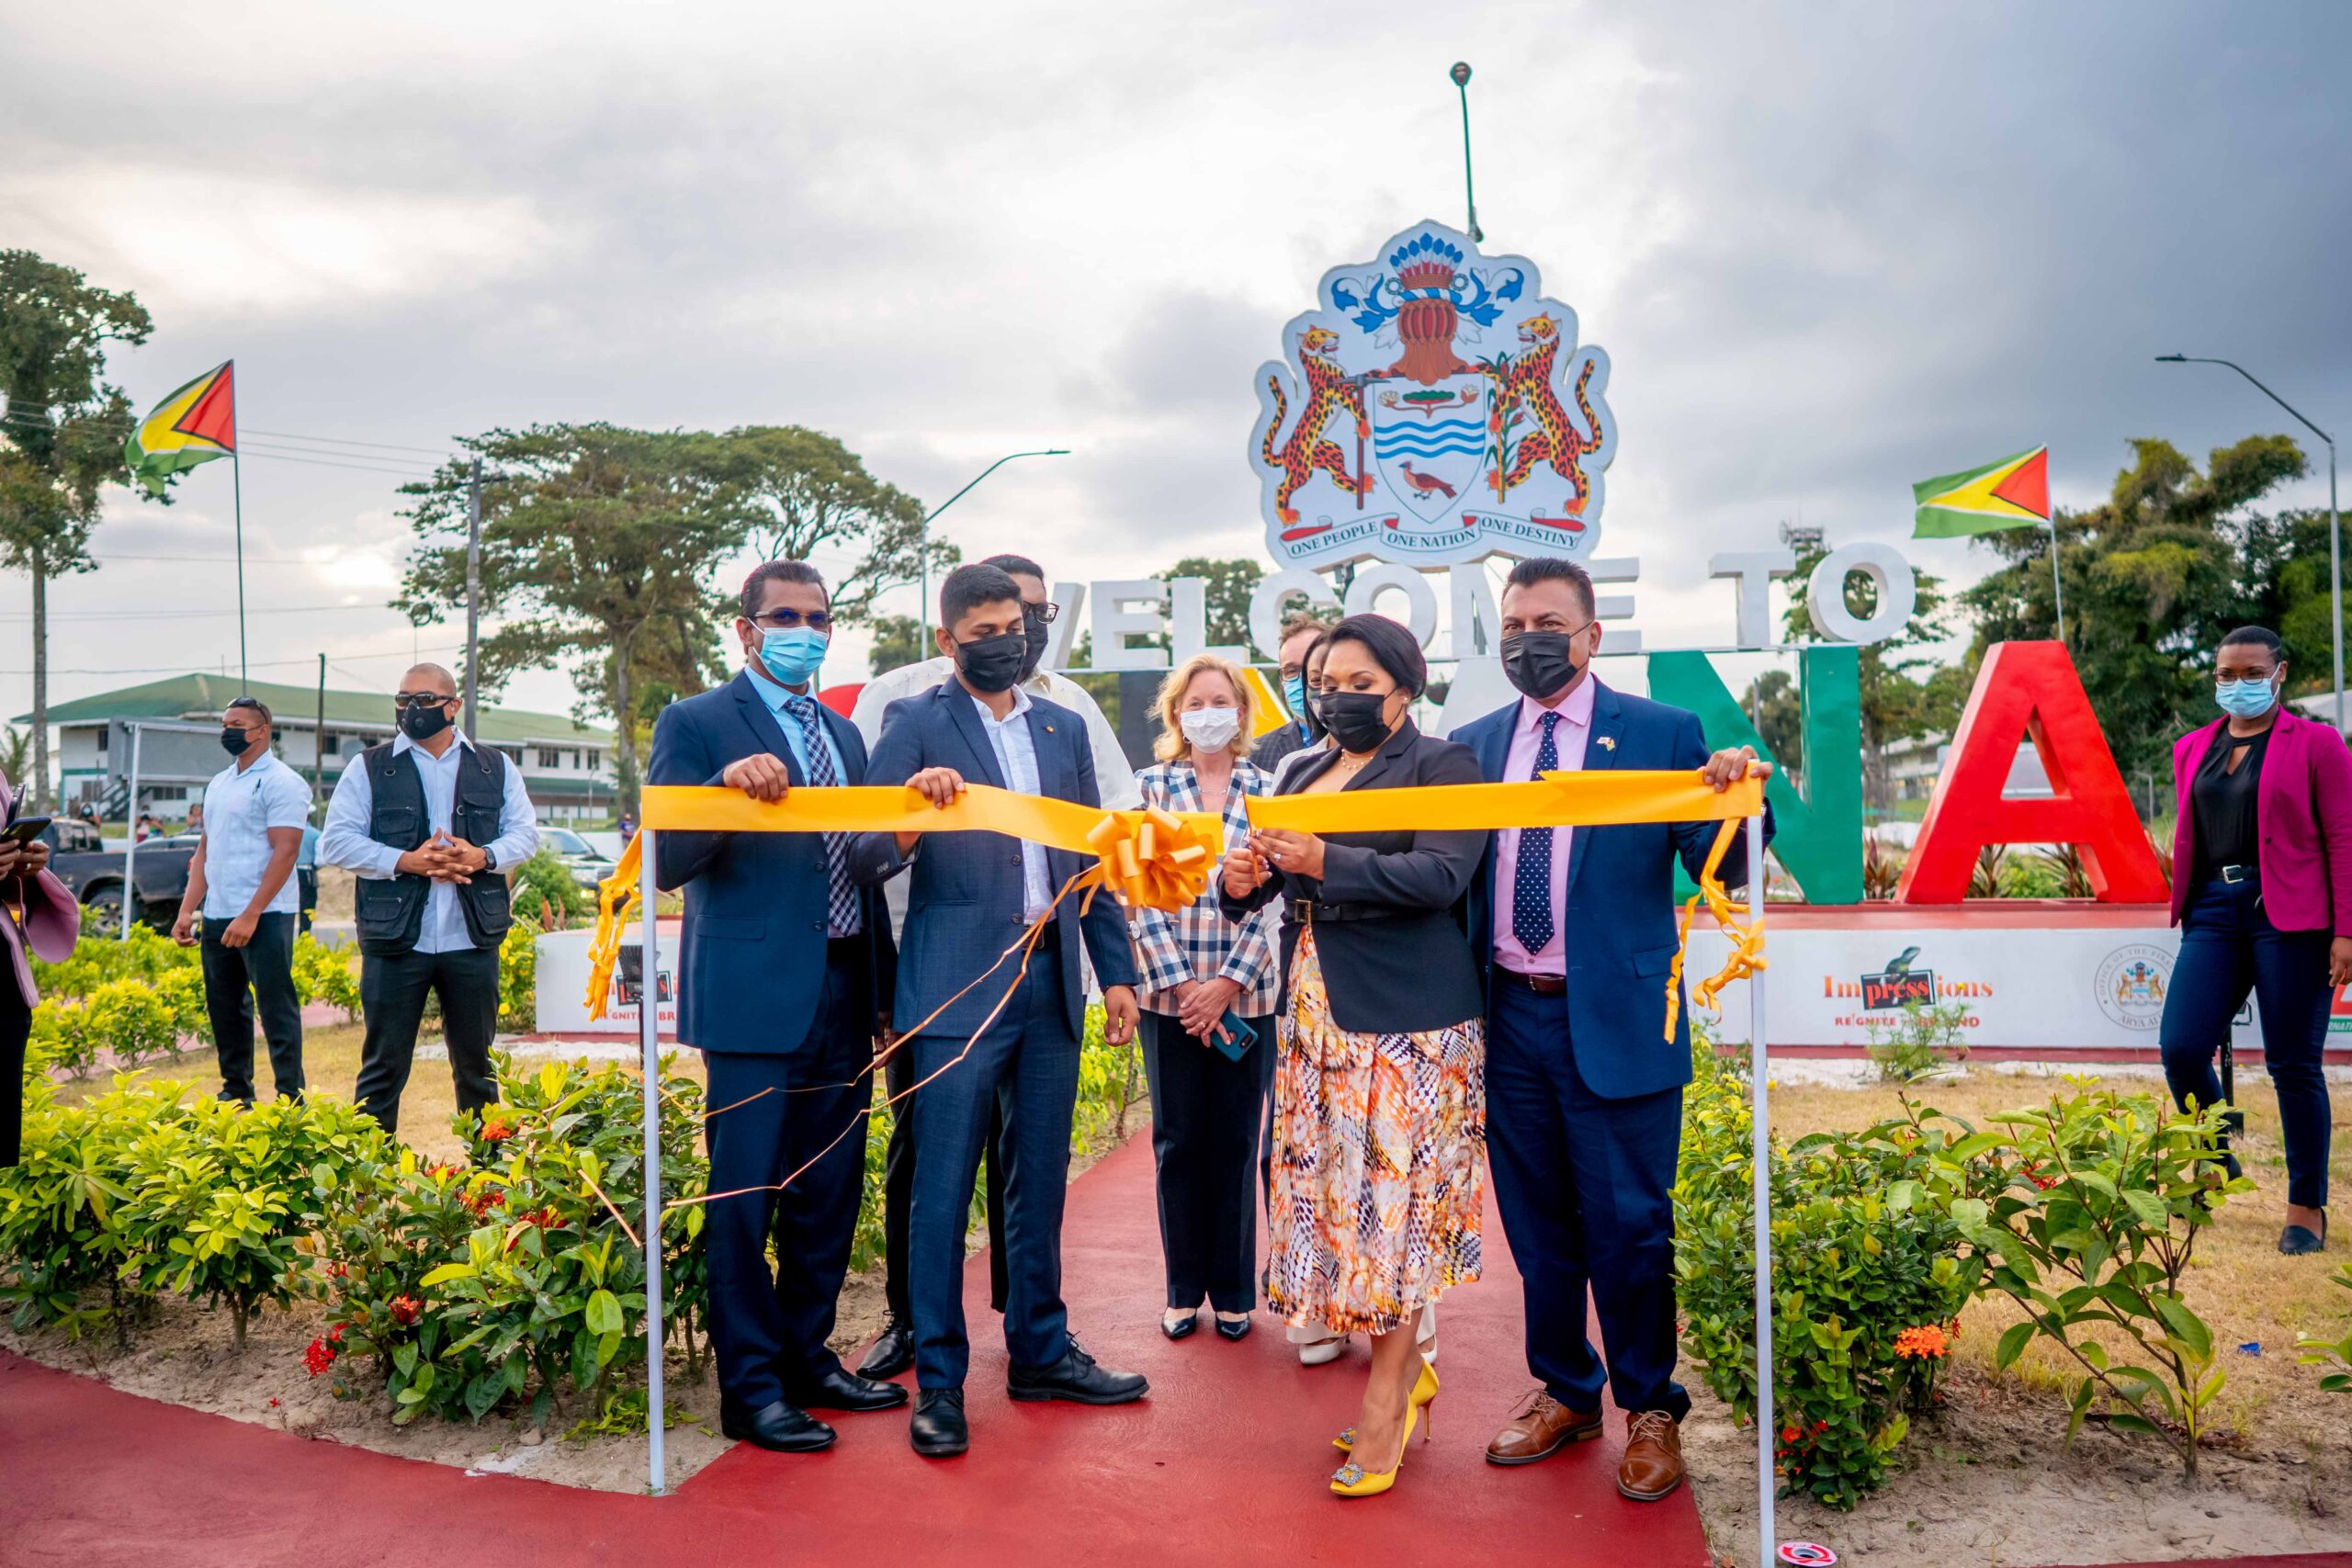 The First Lady Arya Ali commissioning the $25M Welcome to Guyana sign at CJIA in the presence of a number of officials, and diplomats